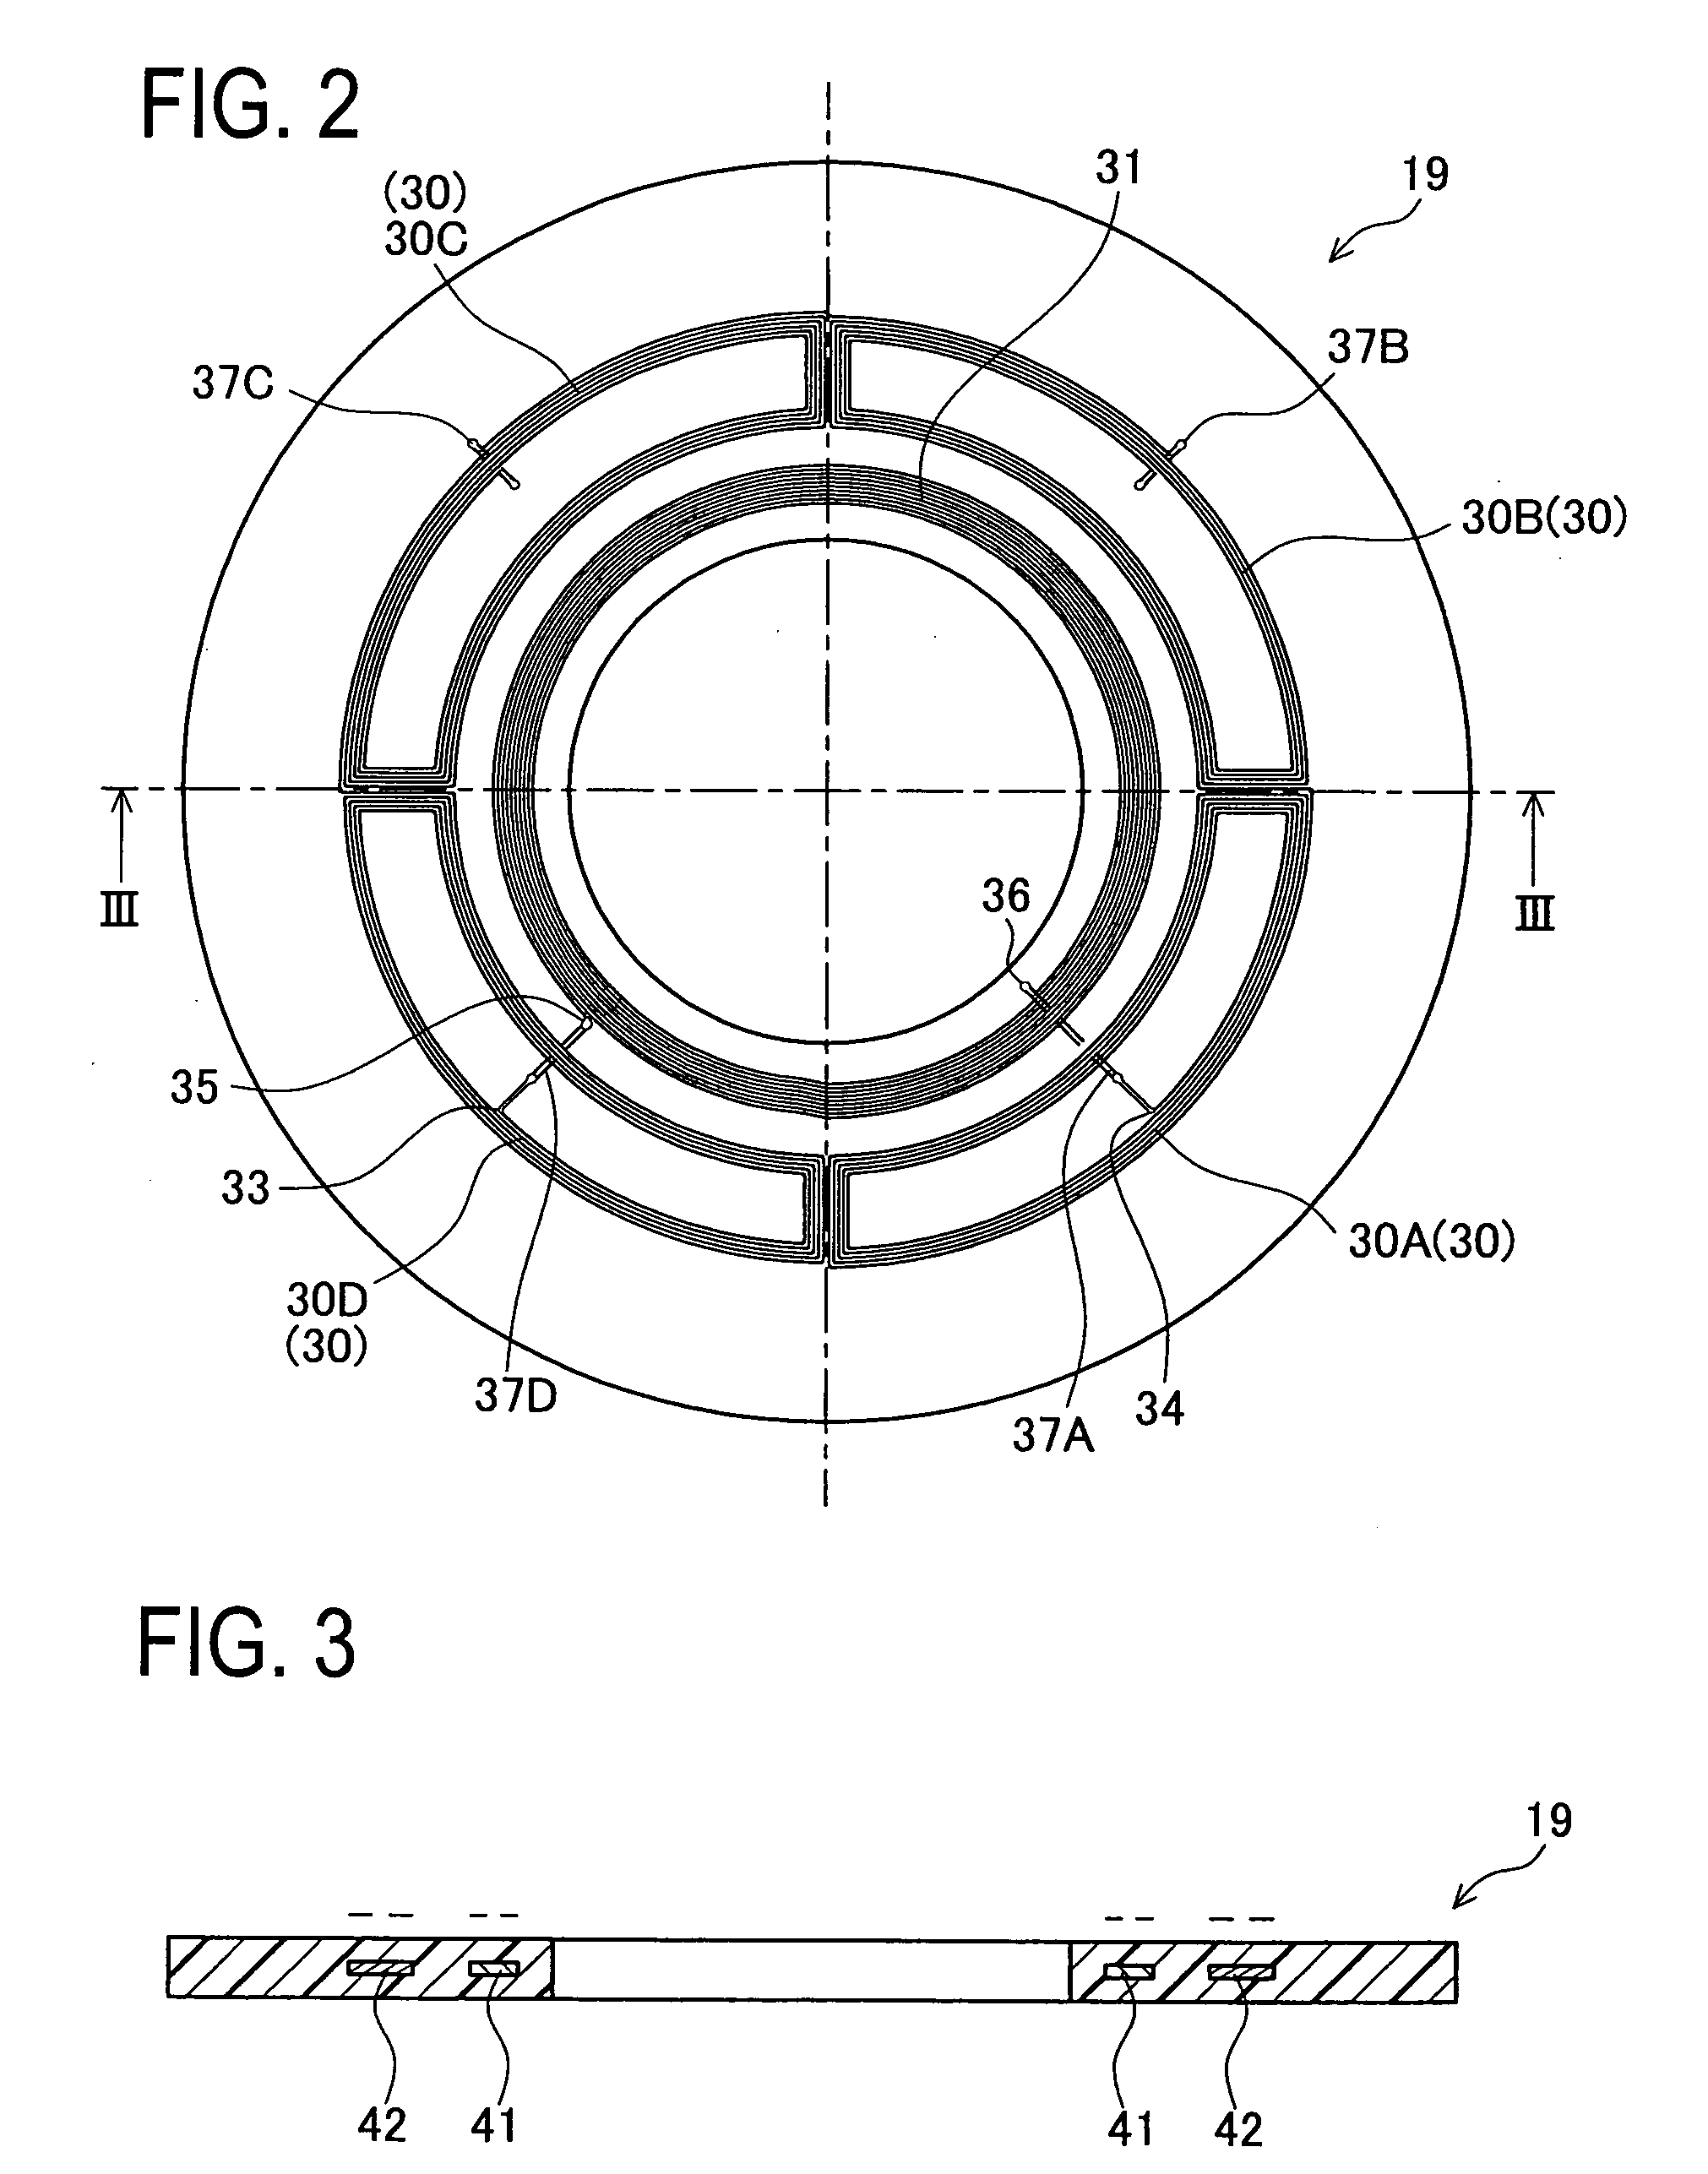 Motor structure with rotation detector